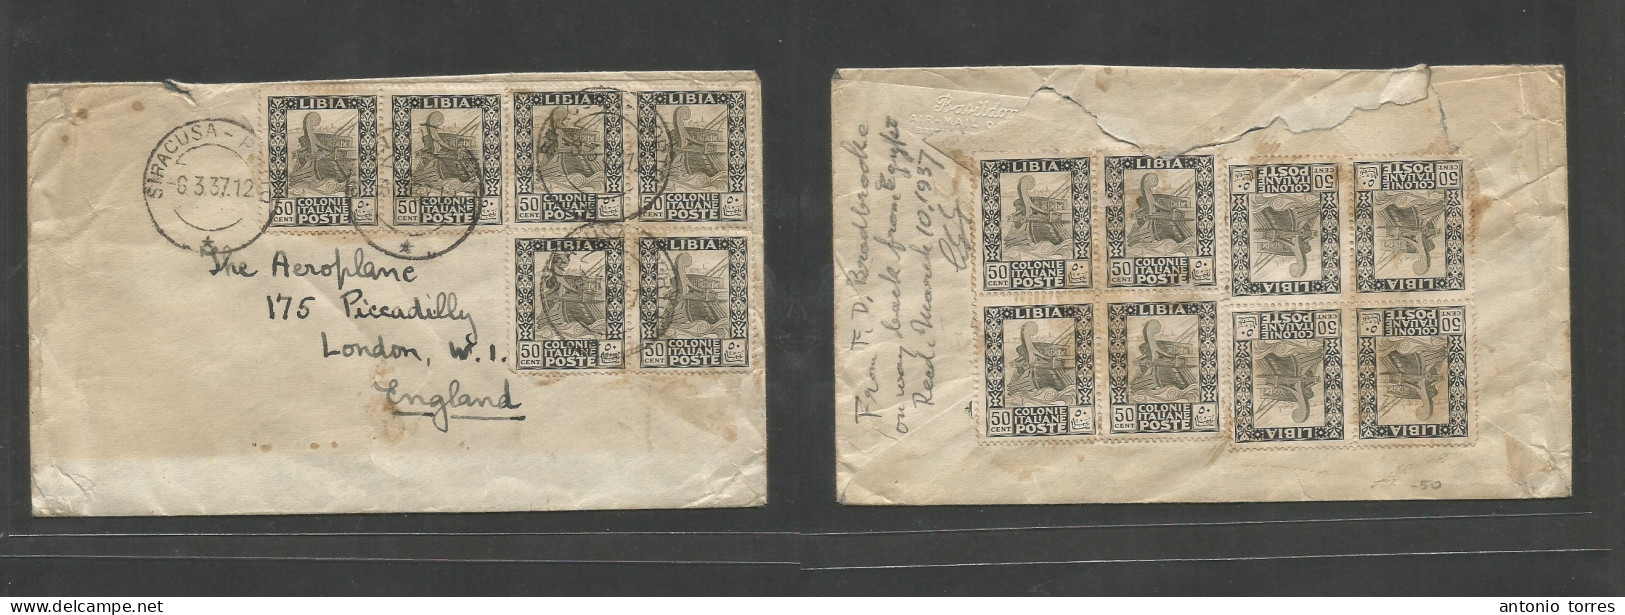 Libia. 1937 (6 March) Italian Admin. Siracusa - England, London. Multifkd Env Front And Reverse At 700c Rate. Fine. - Libya